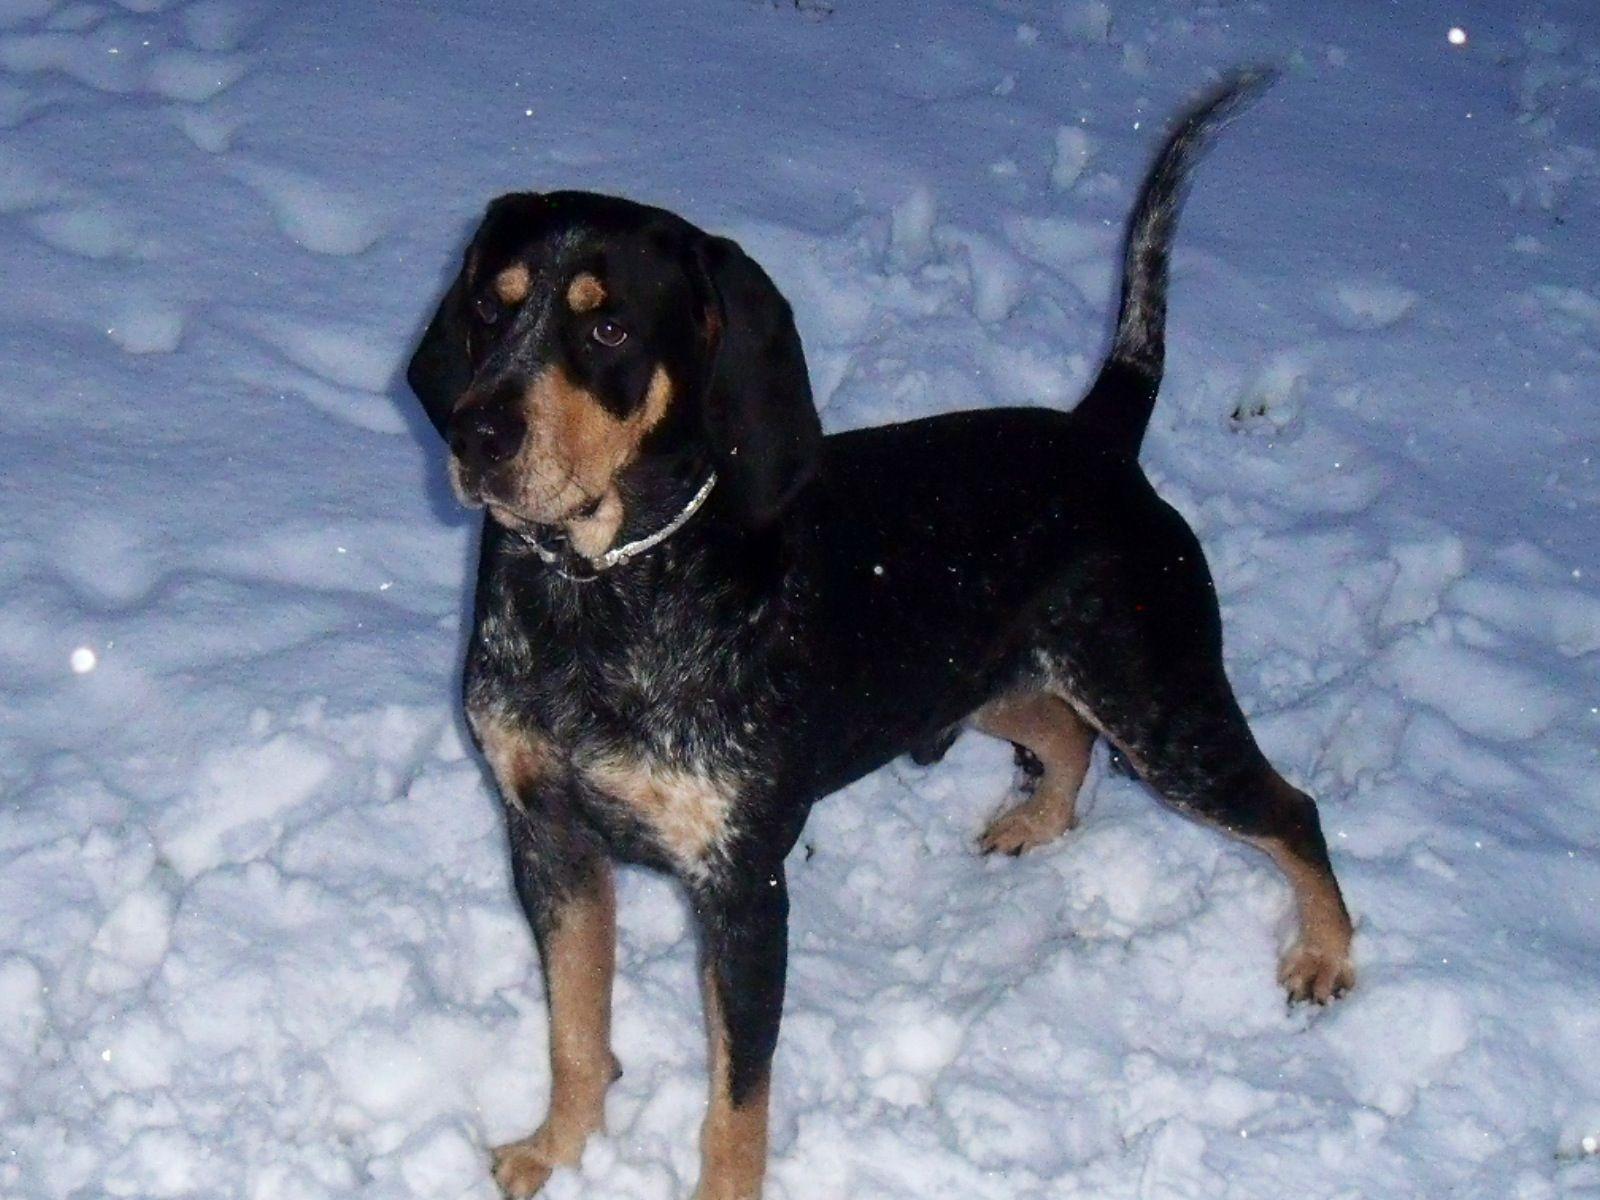 Blue tick black and tan mixed coon hound looks like my bebe. Cant